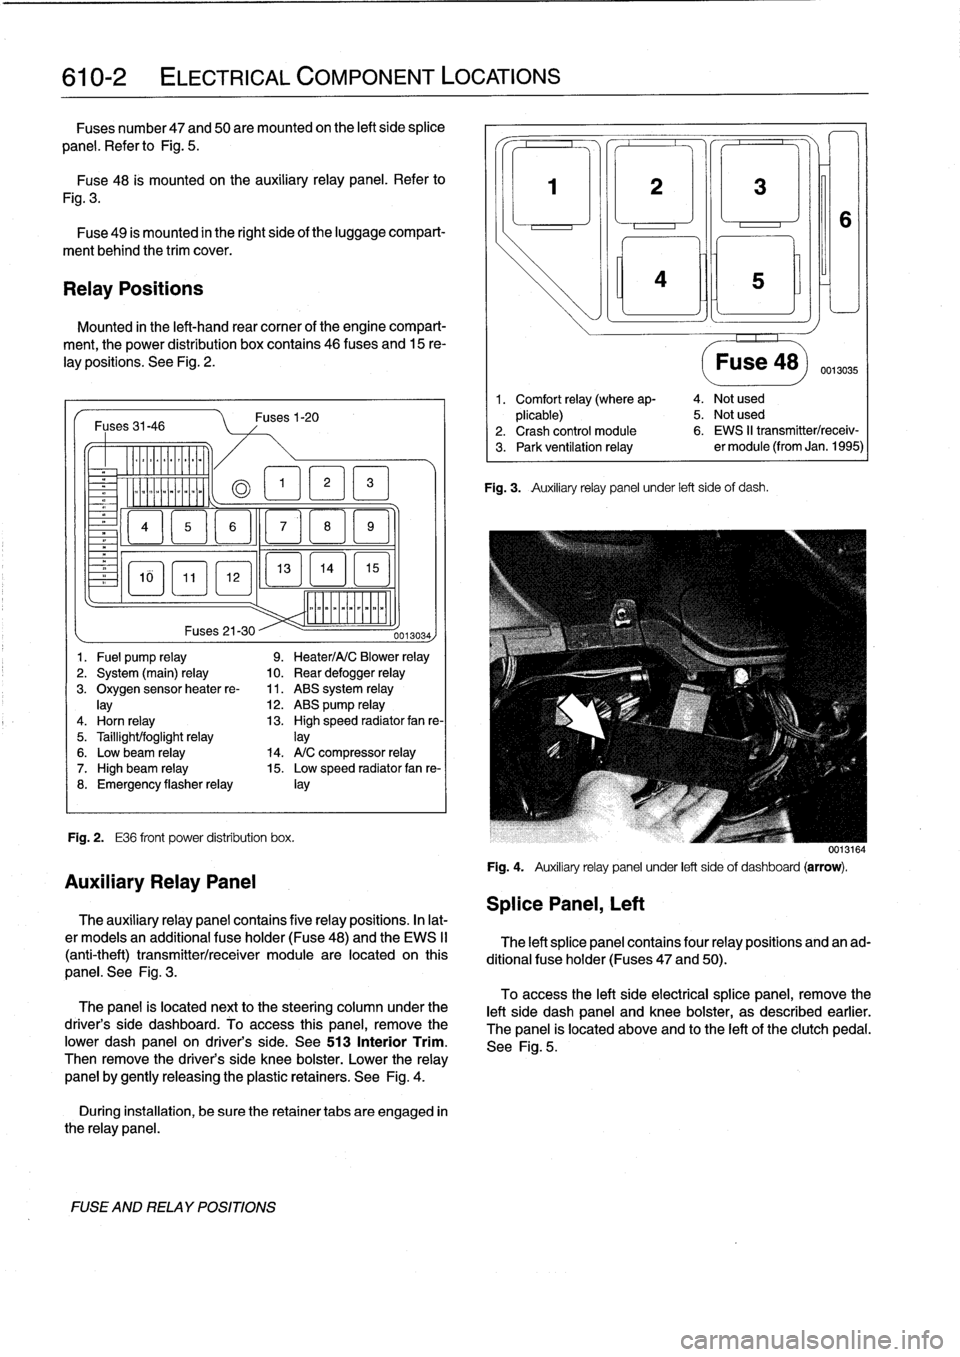 BMW 325i 1992 E36 Workshop Manual 
610-2

	

ELECTRICAL
COMPONENT
LOCATIONS

Fuses
number47
and
50are
mounted
on
the
left
side
splice

panel
.
Refer
lo
Fig
.
5
.

Fuse48
is
mounted
on
the
auxiliary
relay
panel
.
Refer
to

Fig
.
3
.

F